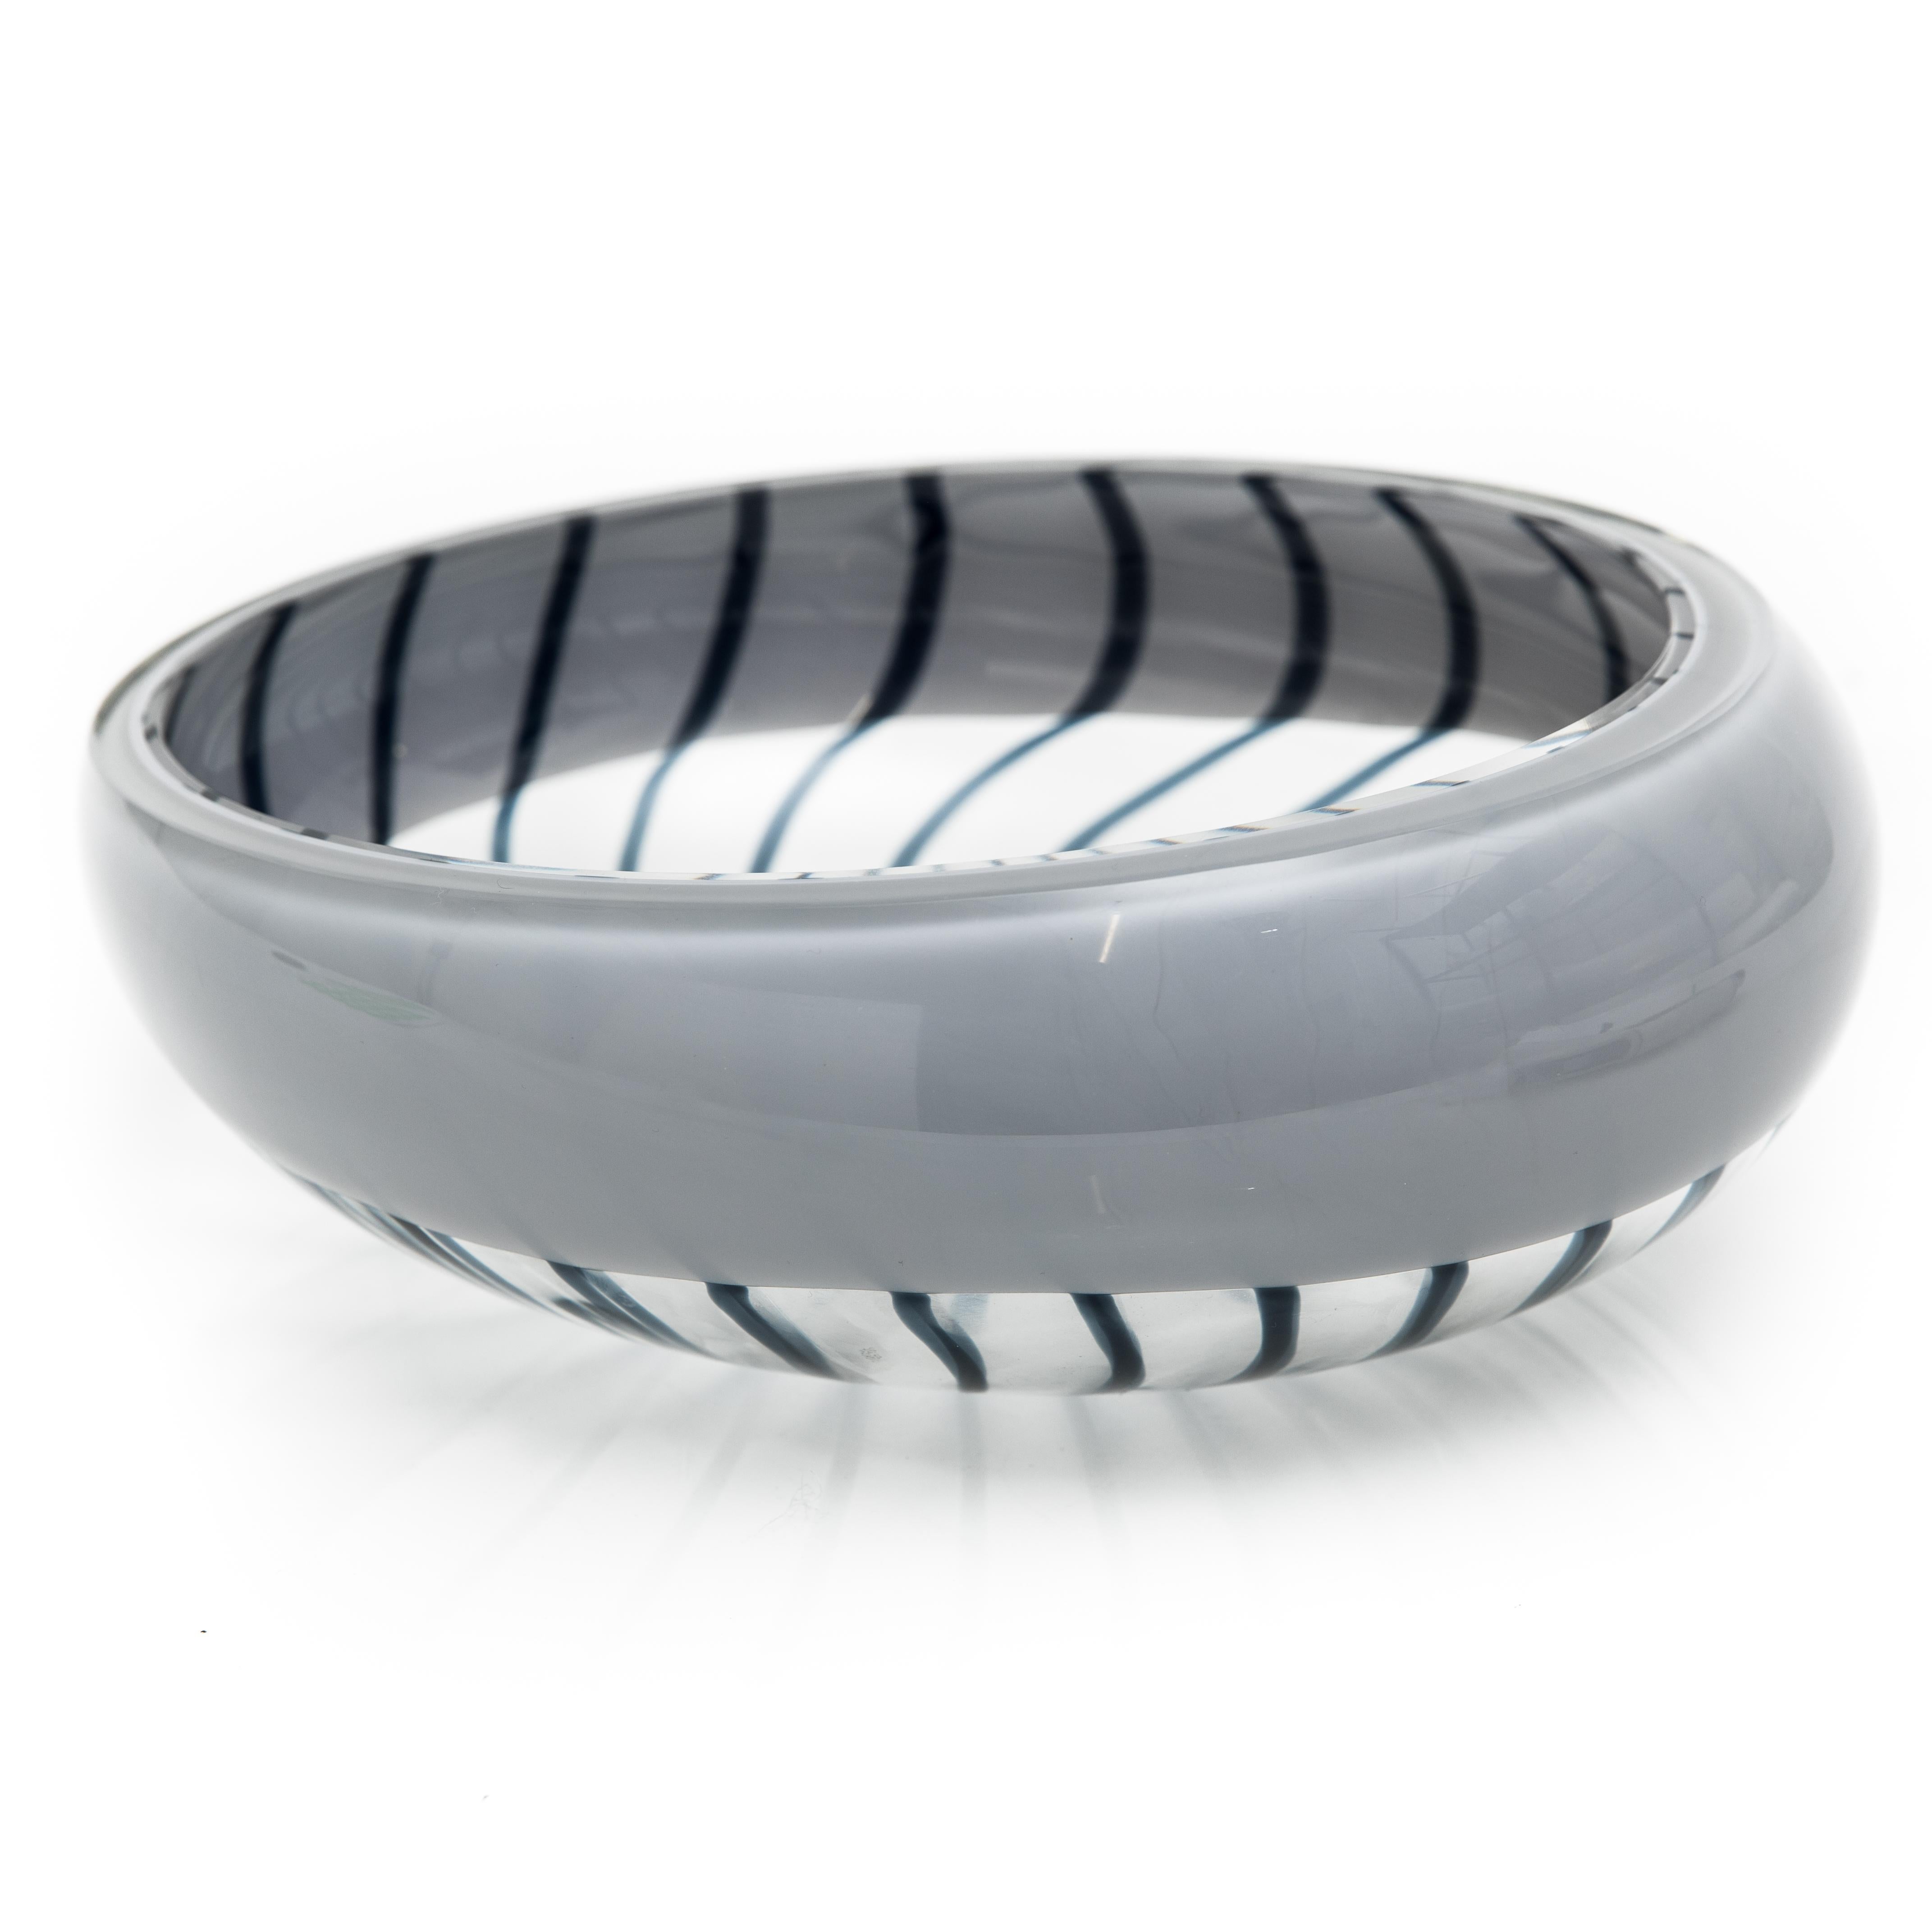 Offered is a Livio Seguso 20th century modern Murano striped art glass bowl. The glass is clear painted with a grey rim and decorated with dark blue stripes. The Bowl is signed on the bottom 